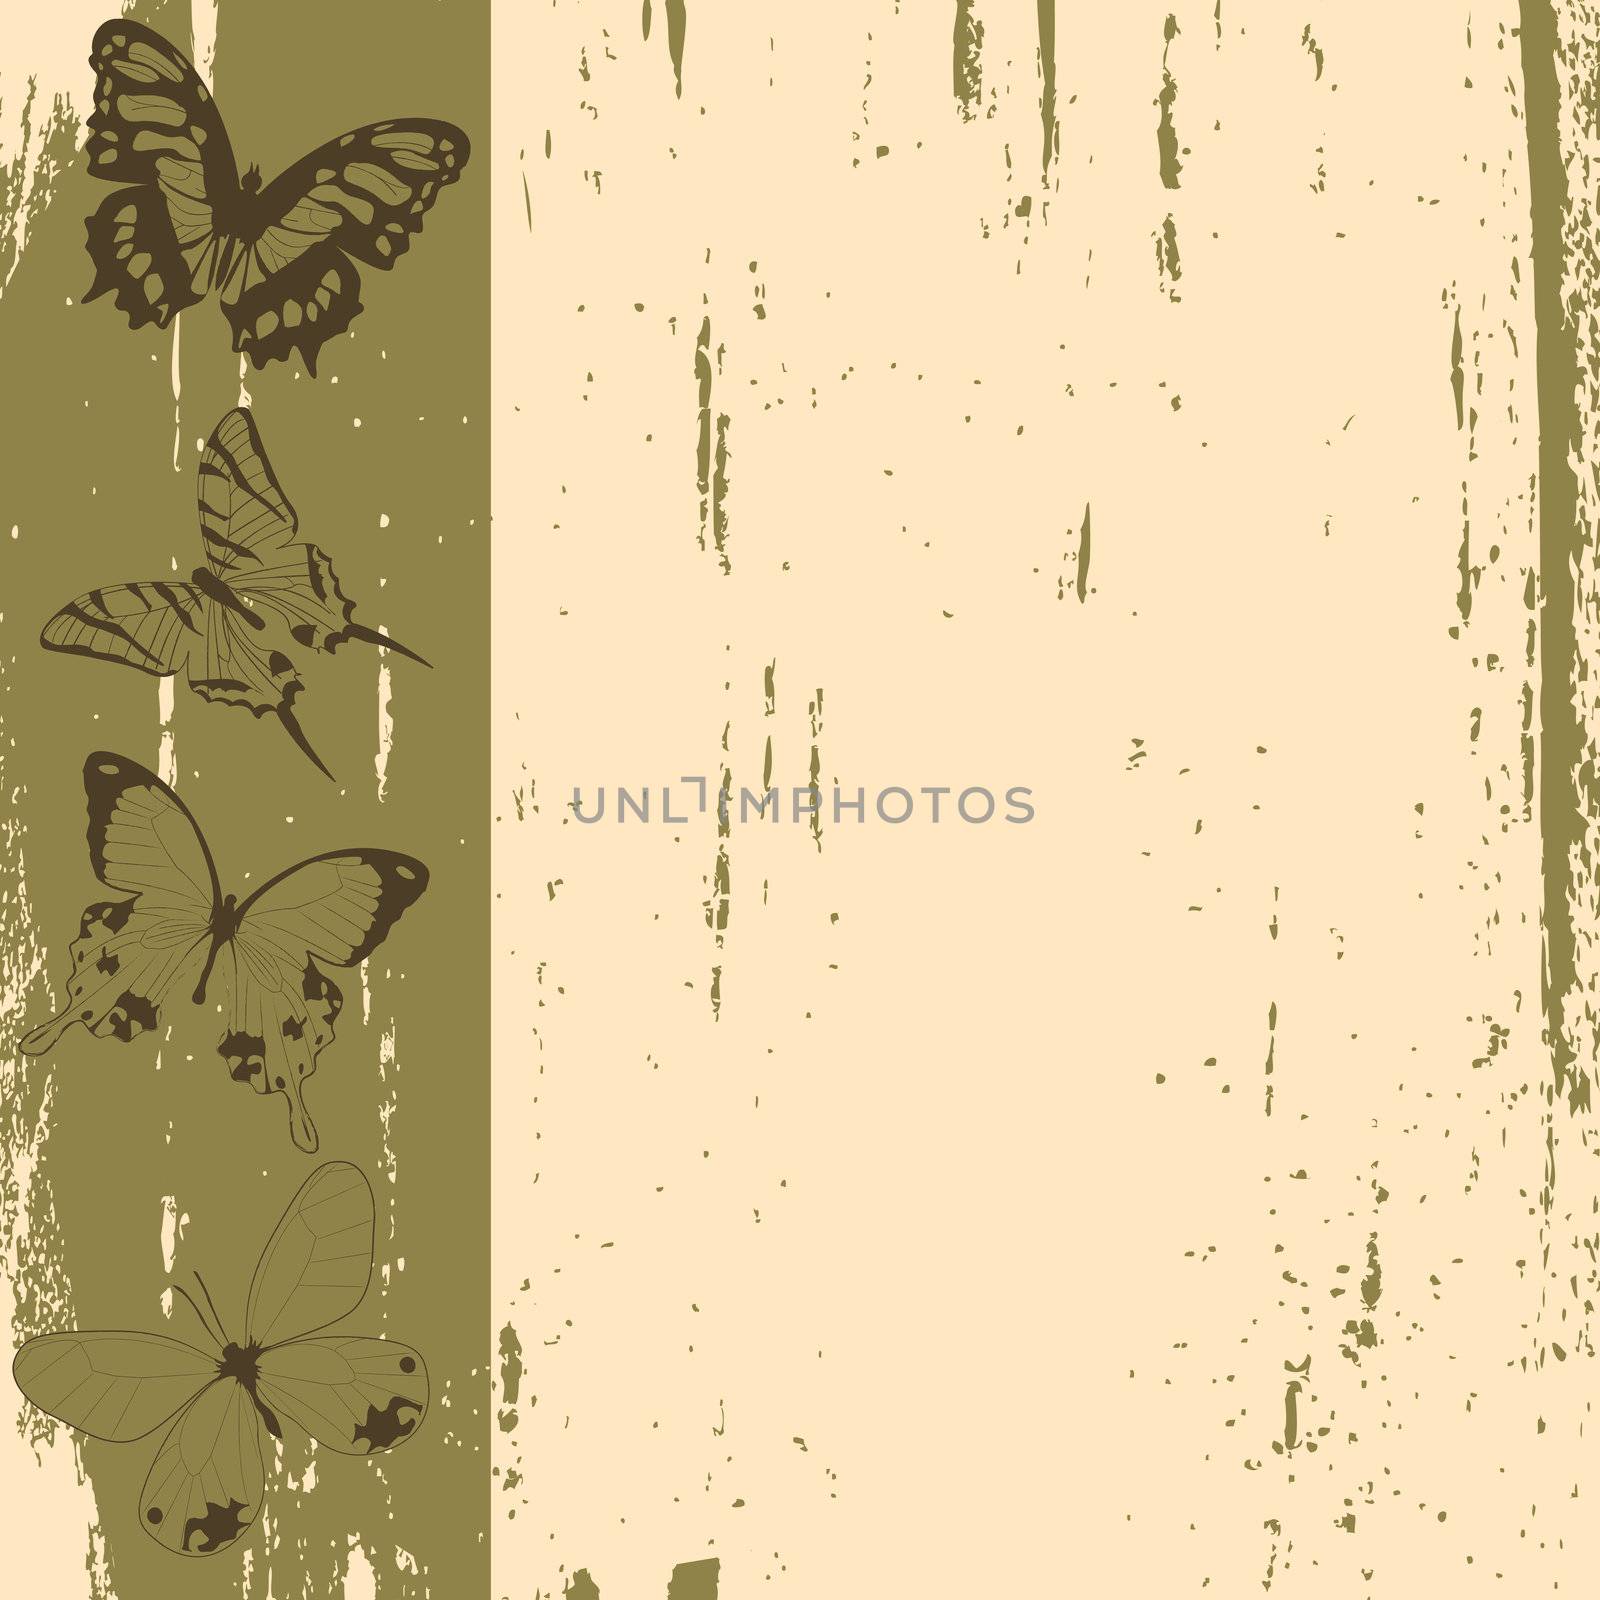 Grunge background sketch with butterflies